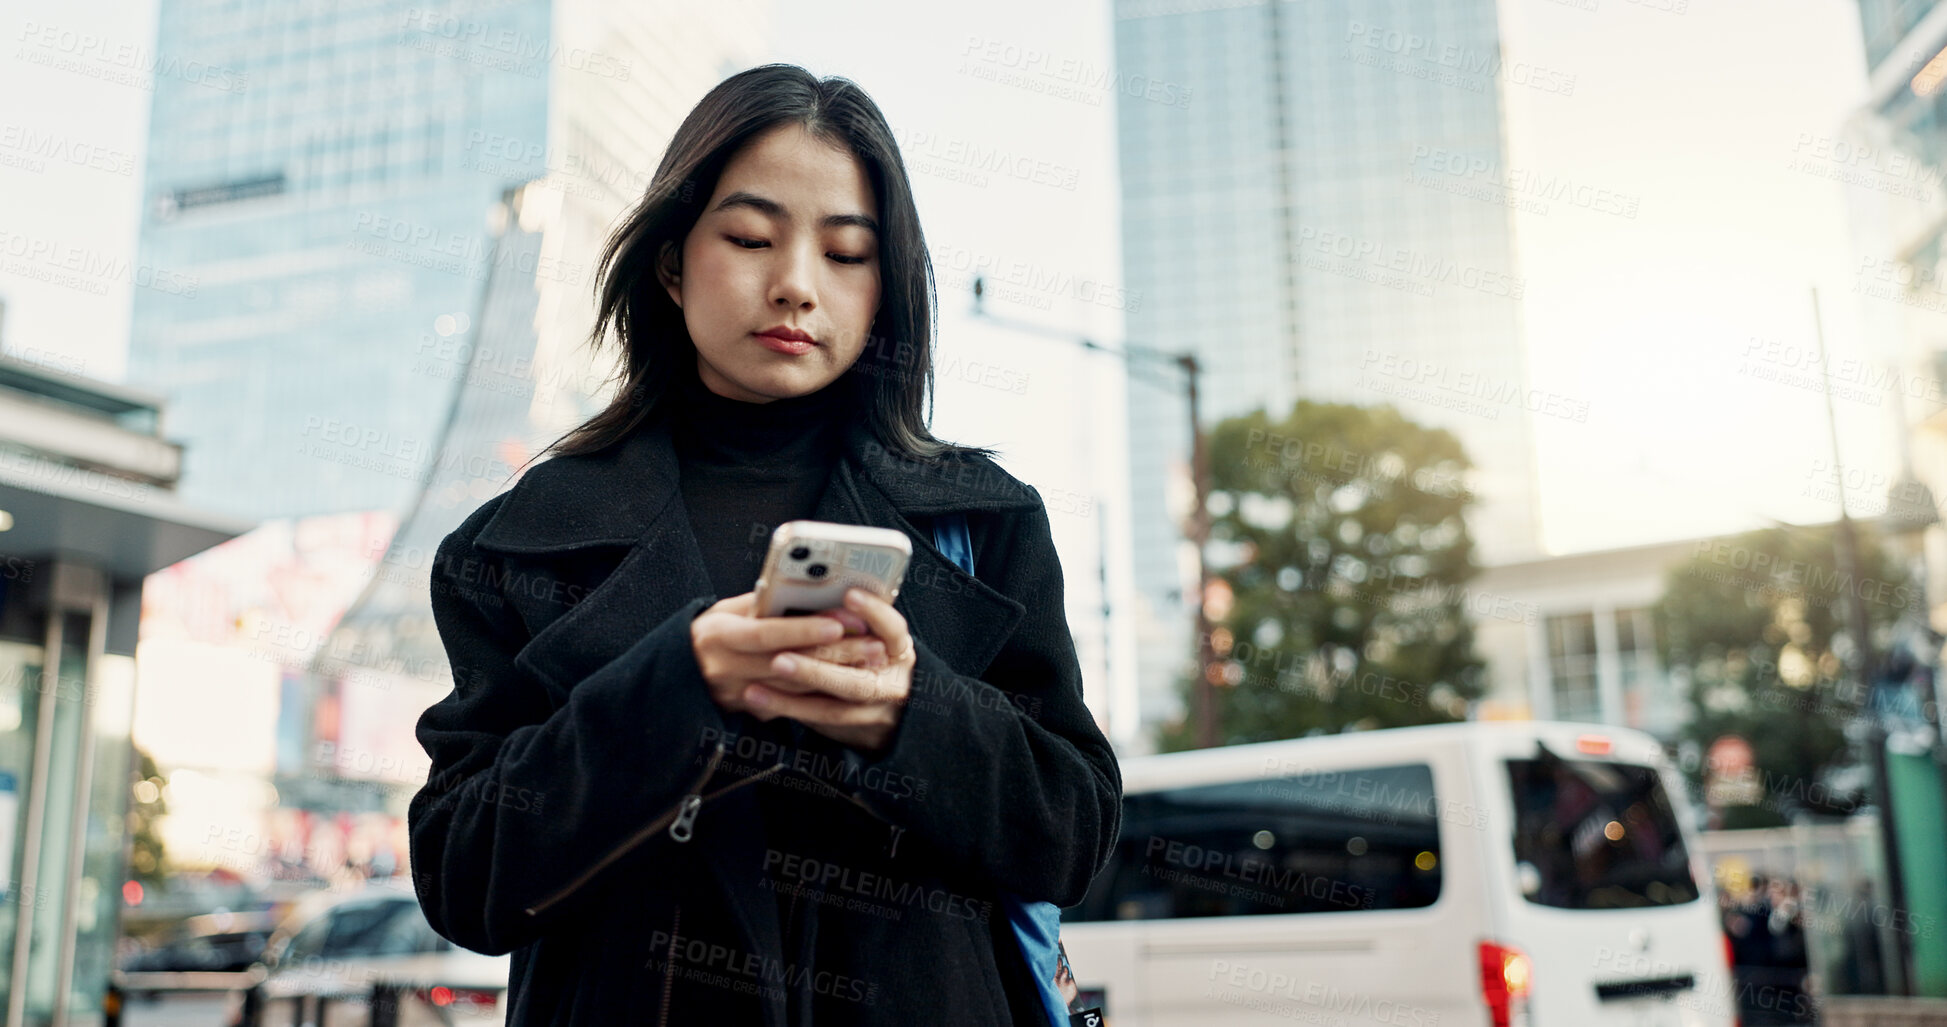 Buy stock photo Smartphone, city and Japanese woman on social media, reading email or notification in Tokyo. Phone, mobile and serious person in urban street outdoor for communication technology, network or internet